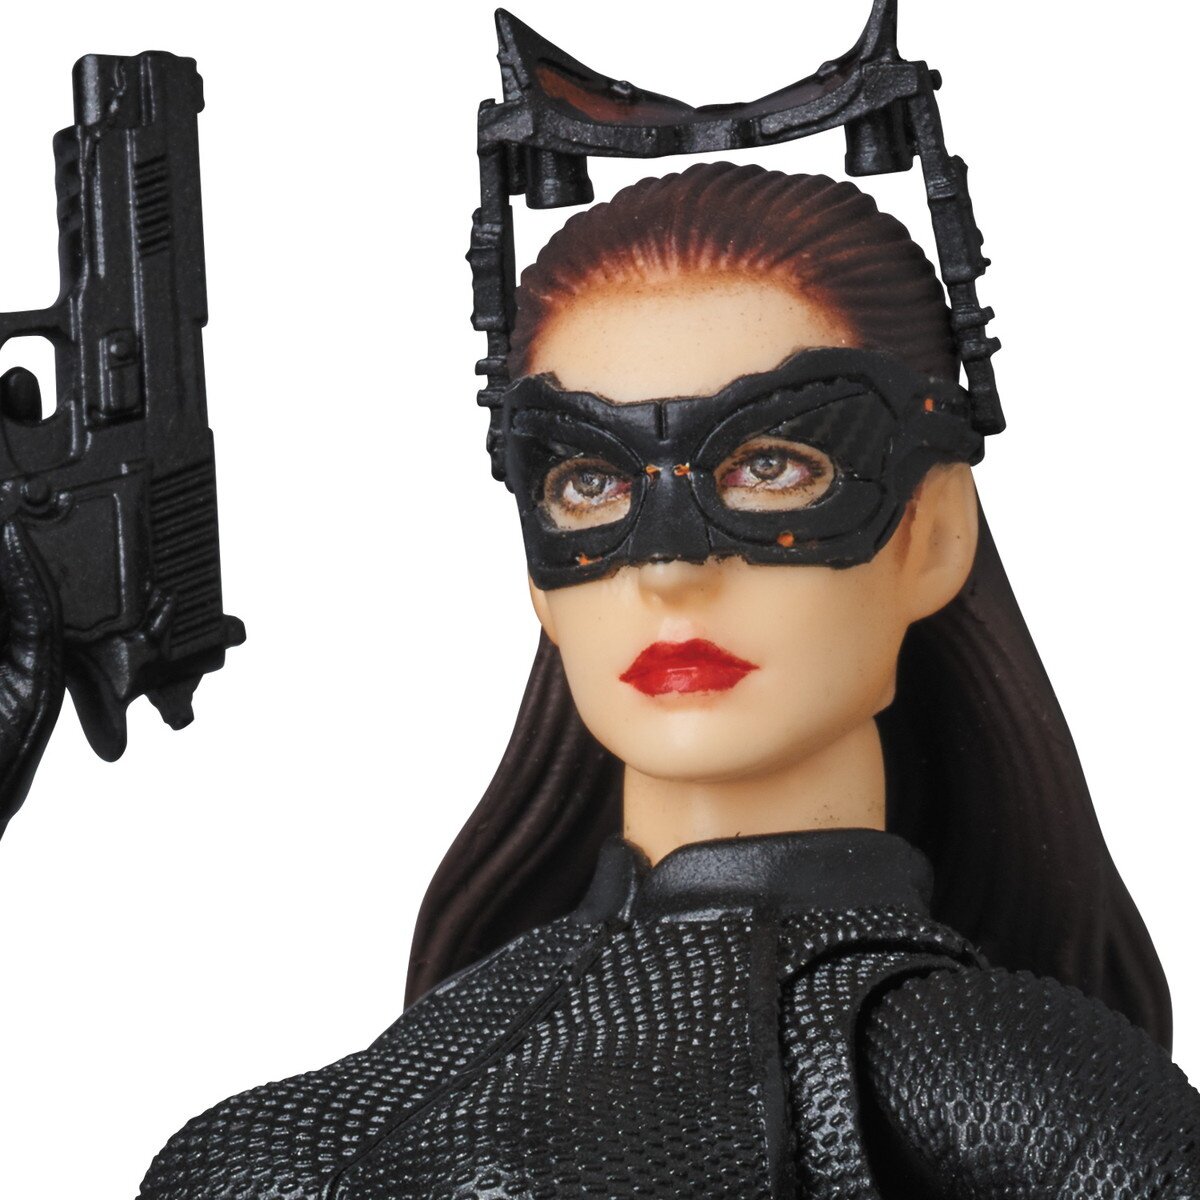 Mafex The Dark Knight Rises Selina Kyle Ver. 2.0